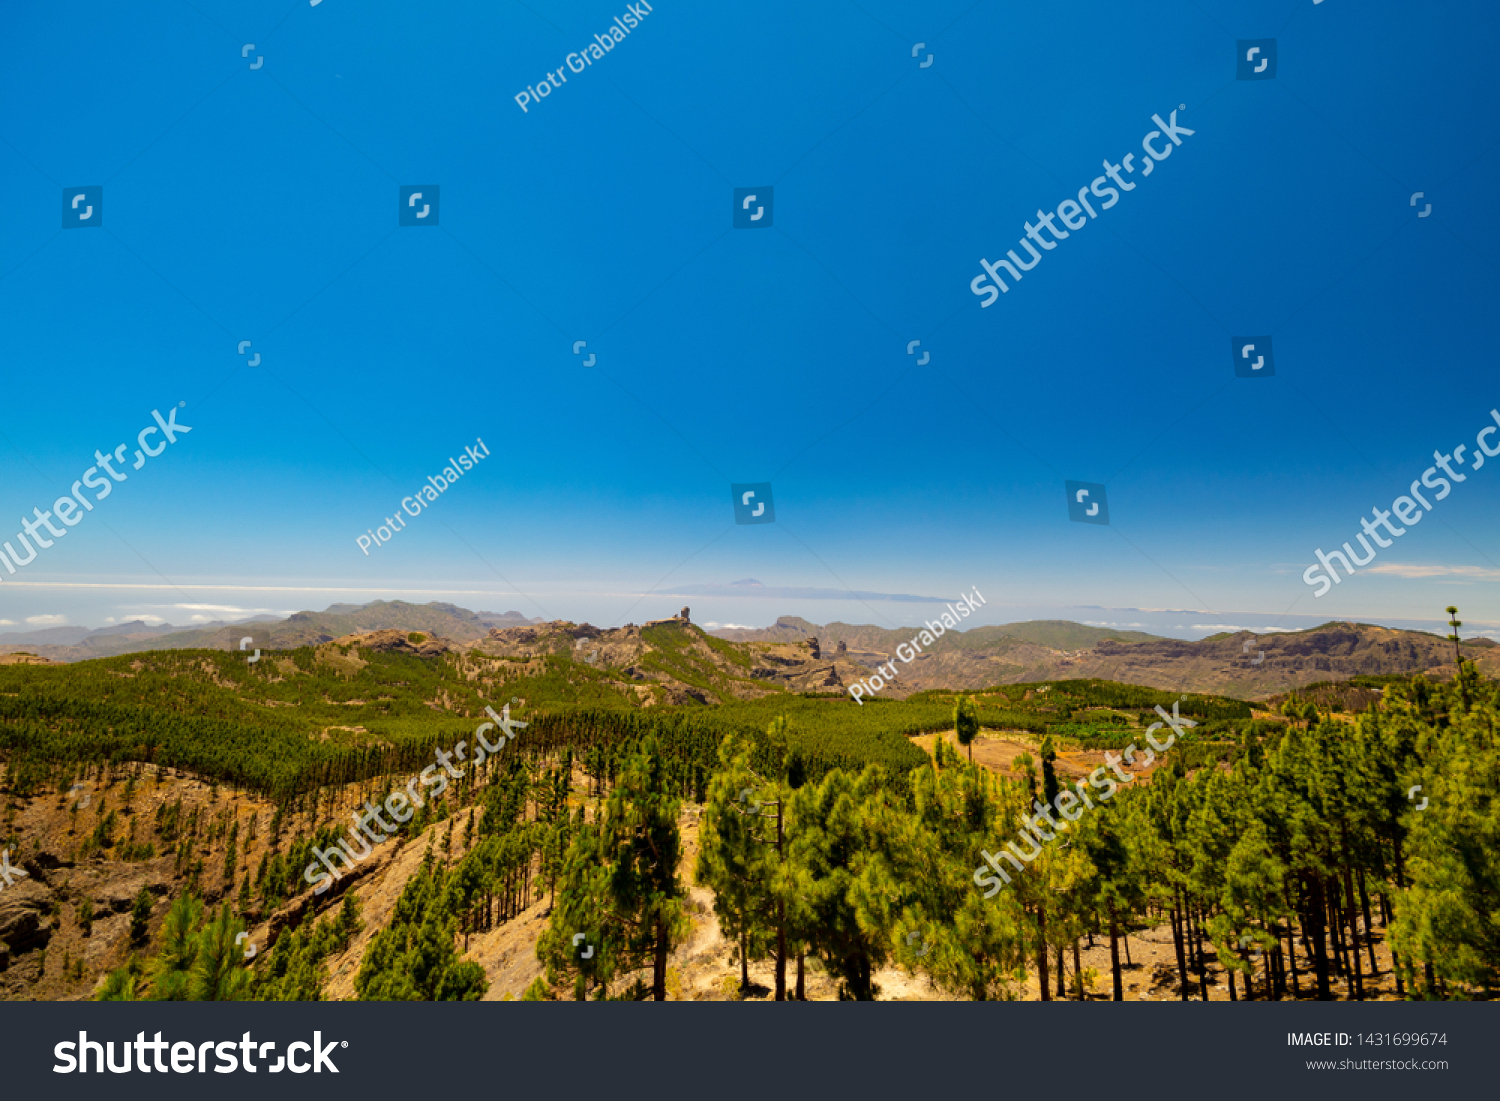 View of Gran Canaria island with Tenerife visible on the horizon #1431699674